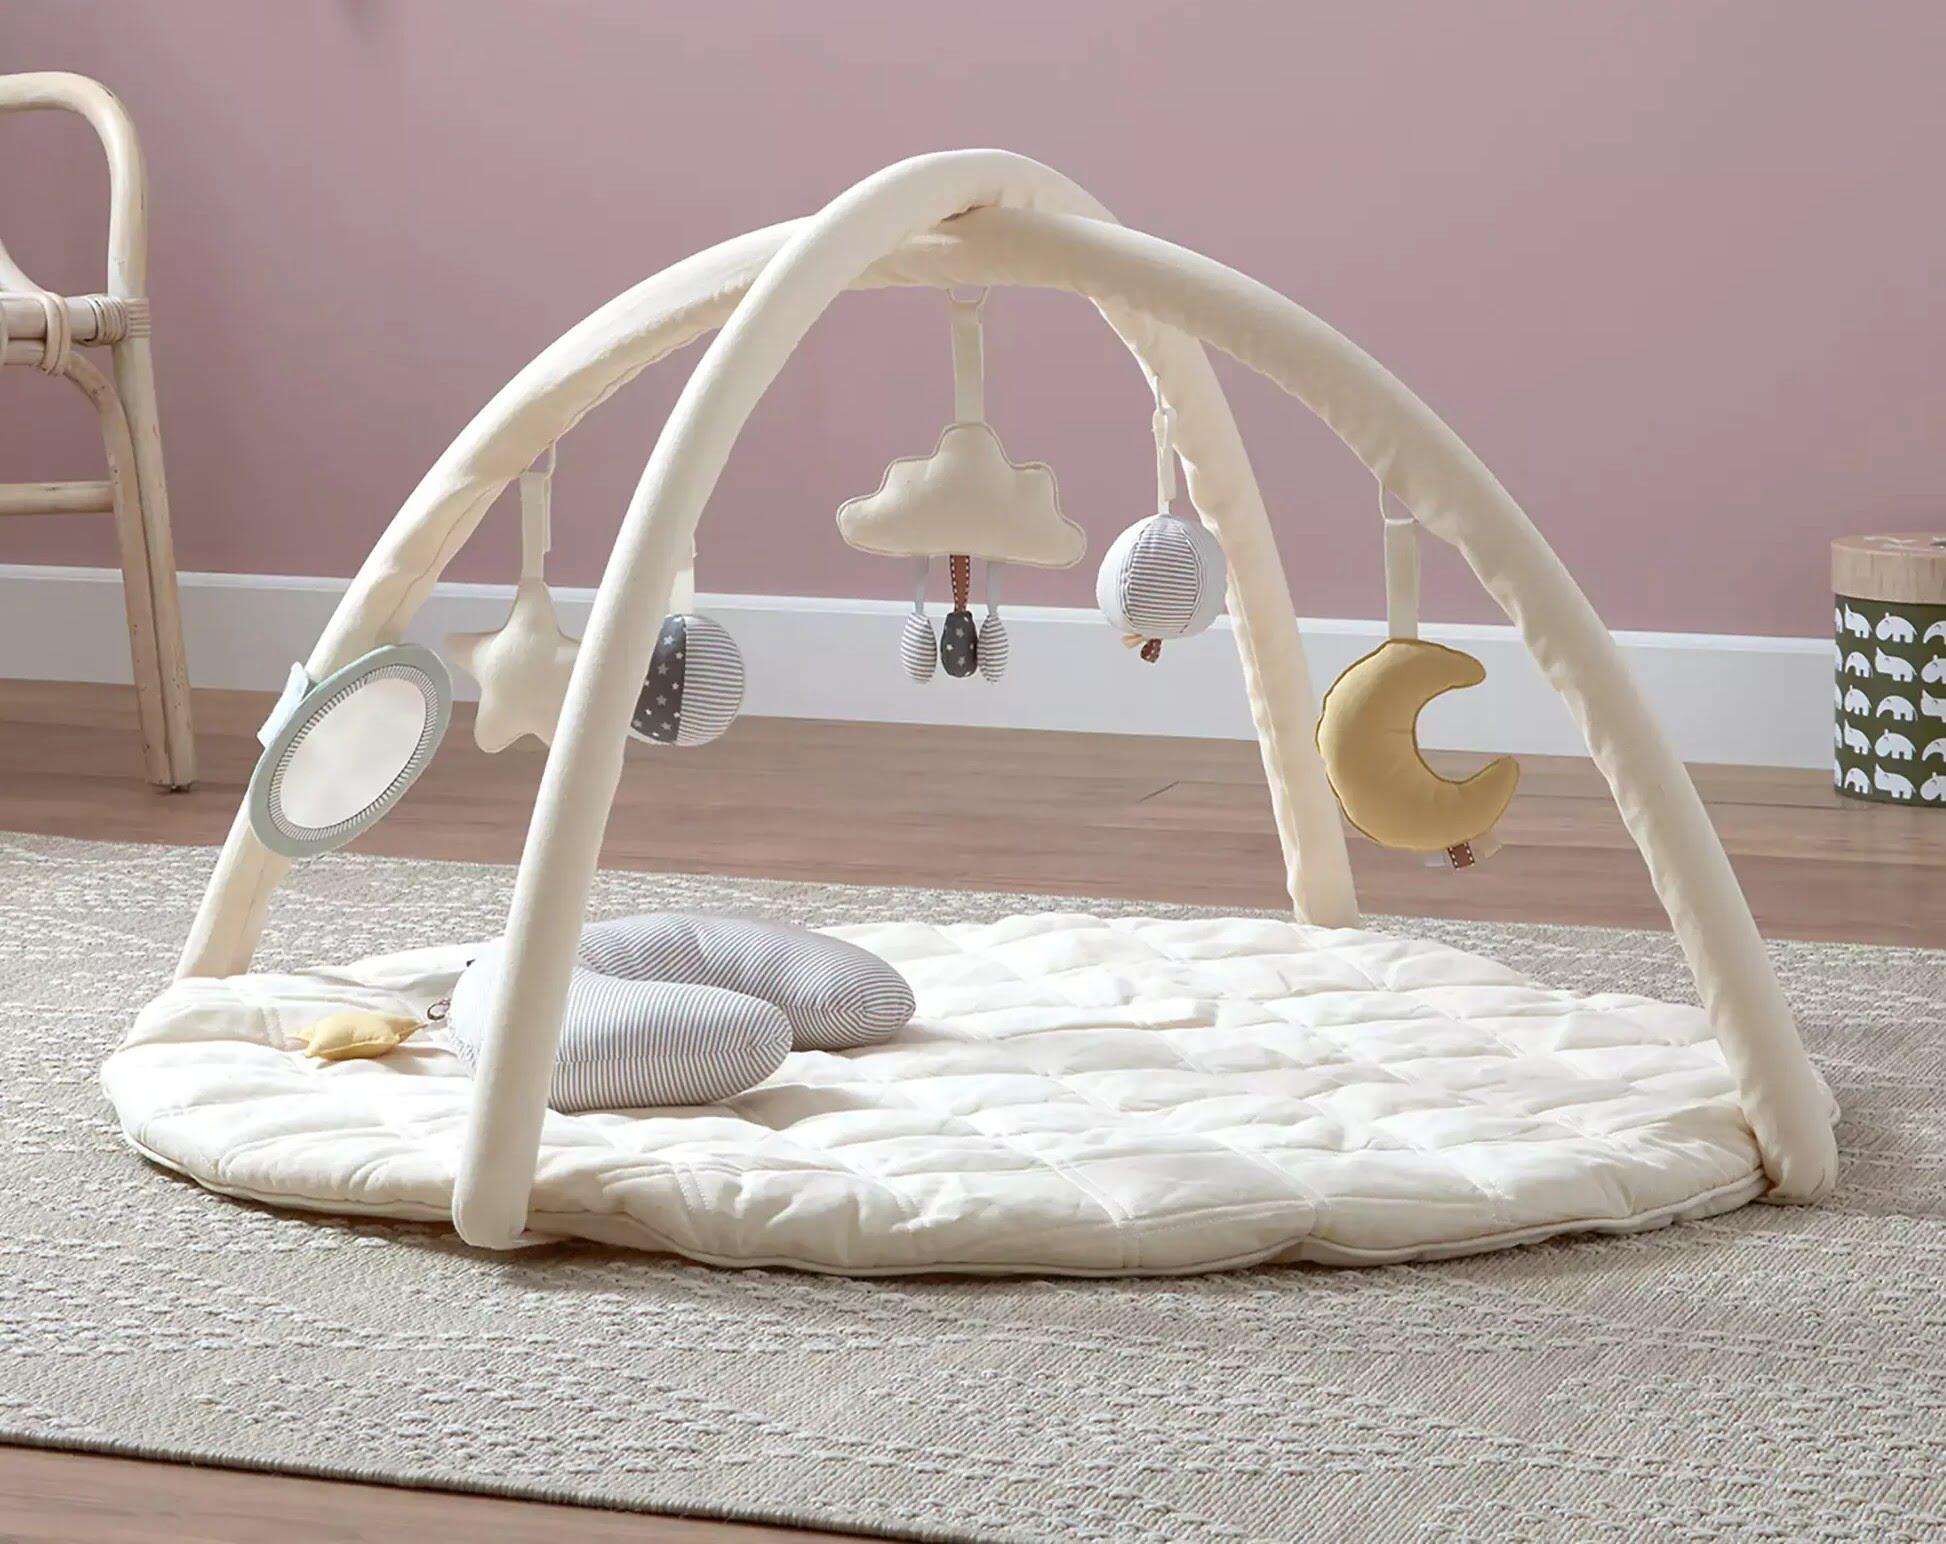 Review: Best Infant Play Gym for Development and Fun